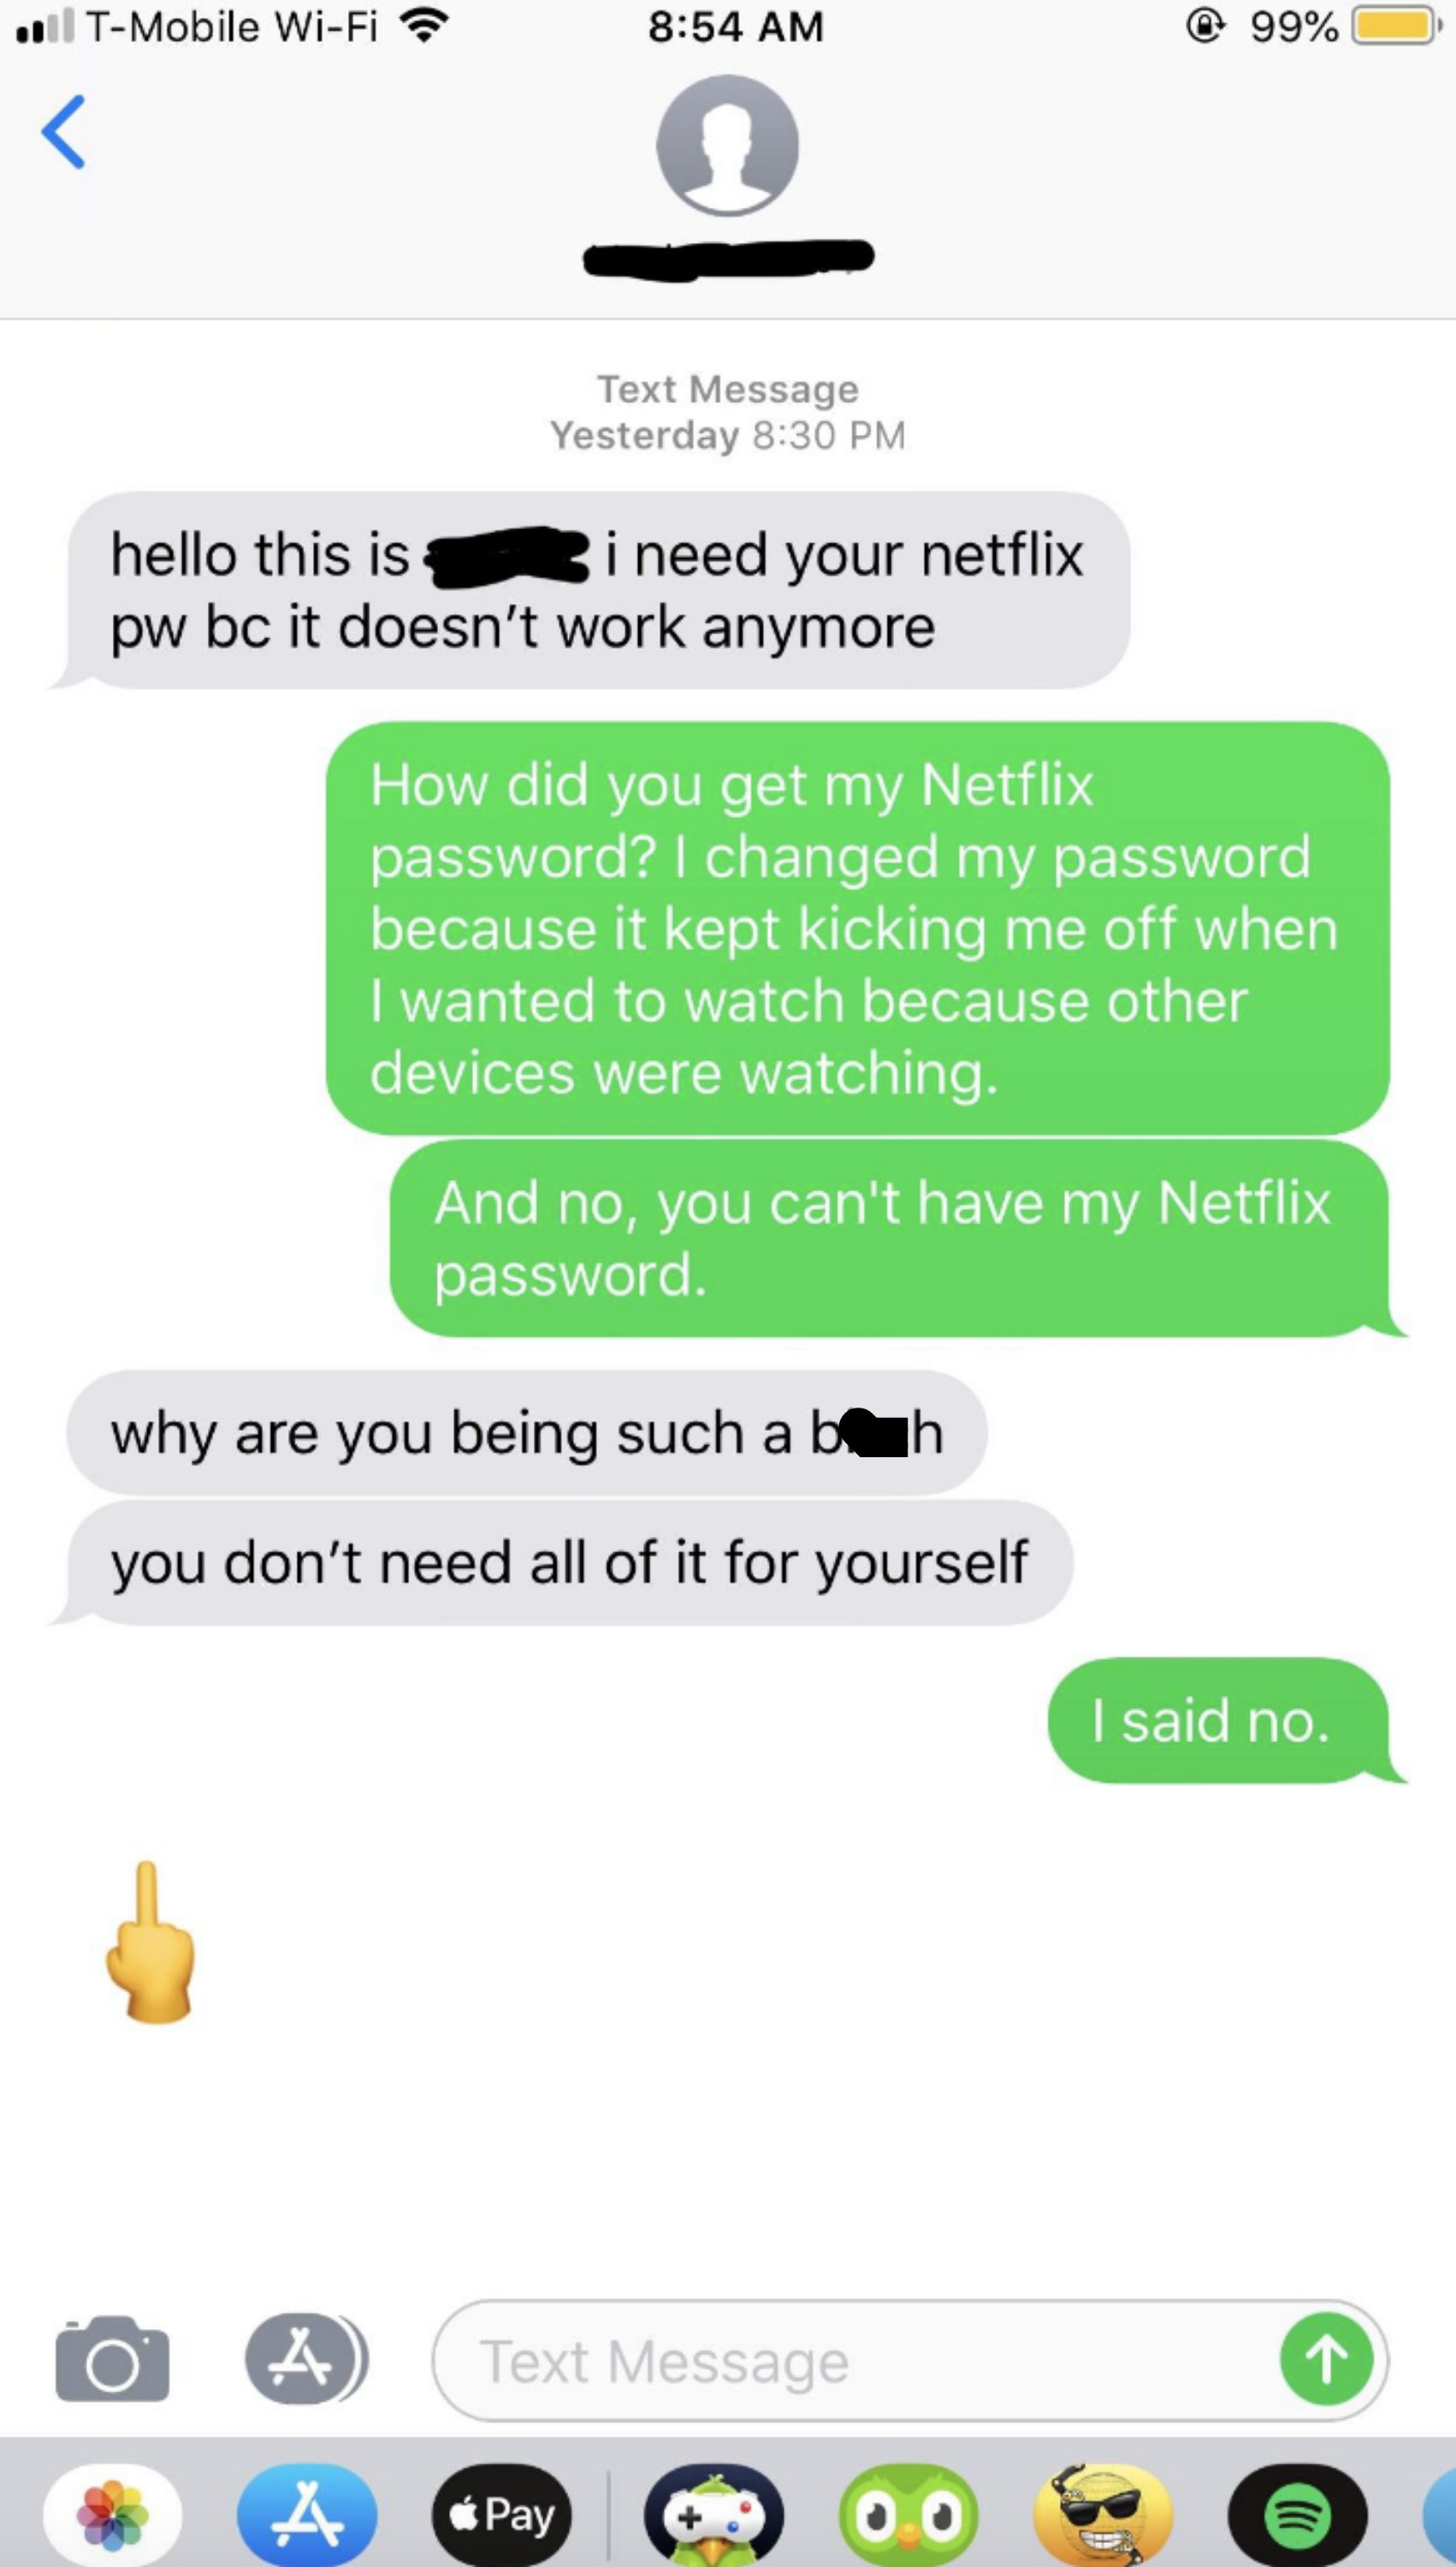 Someone asks their cousin for their Netflix password, and when the cousin says no, the person says &quot;why are you being a bitch&quot; with a middle finger emoji